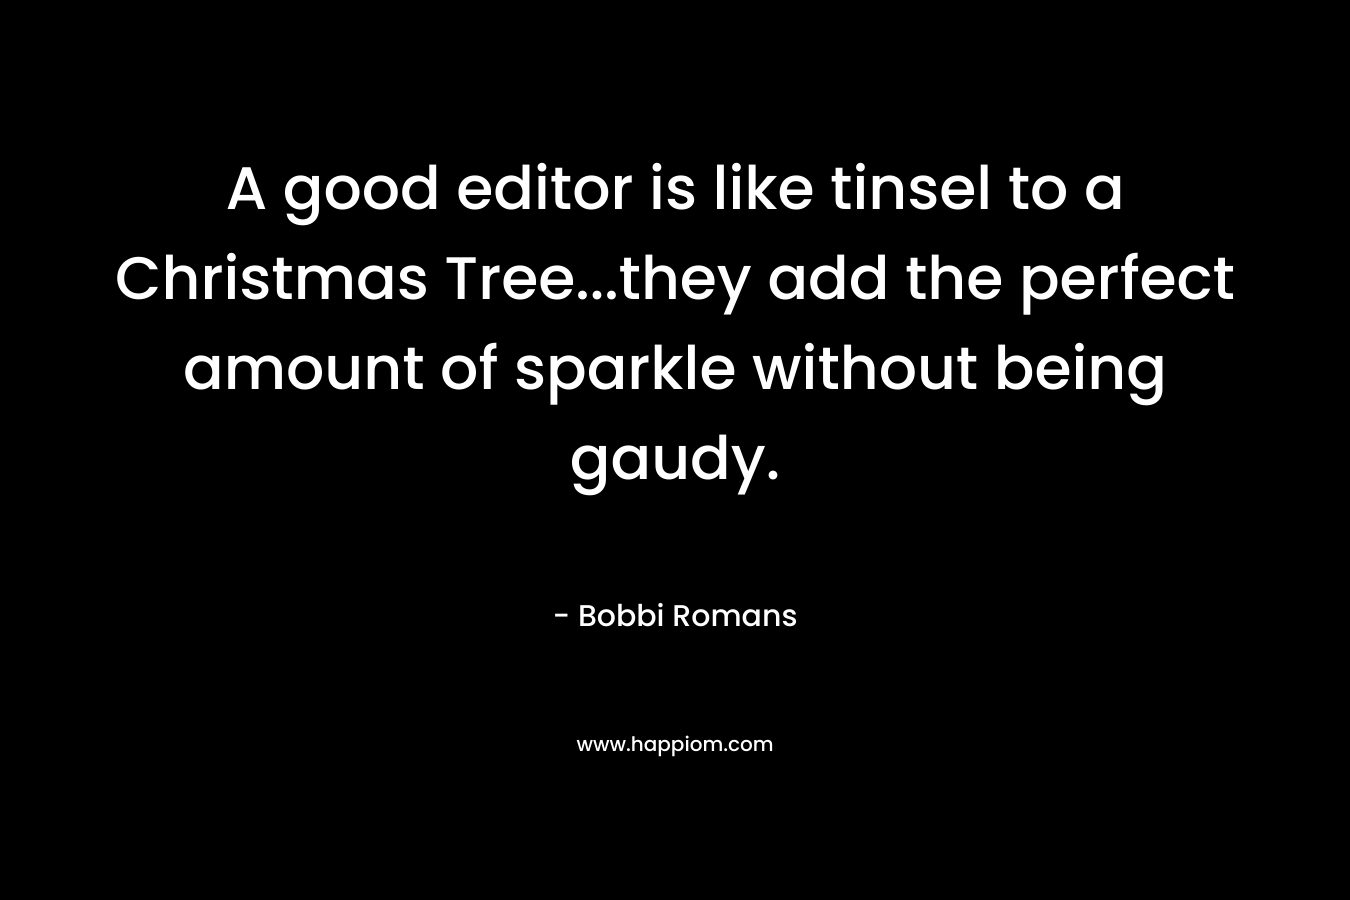 A good editor is like tinsel to a Christmas Tree…they add the perfect amount of sparkle without being gaudy. – Bobbi Romans